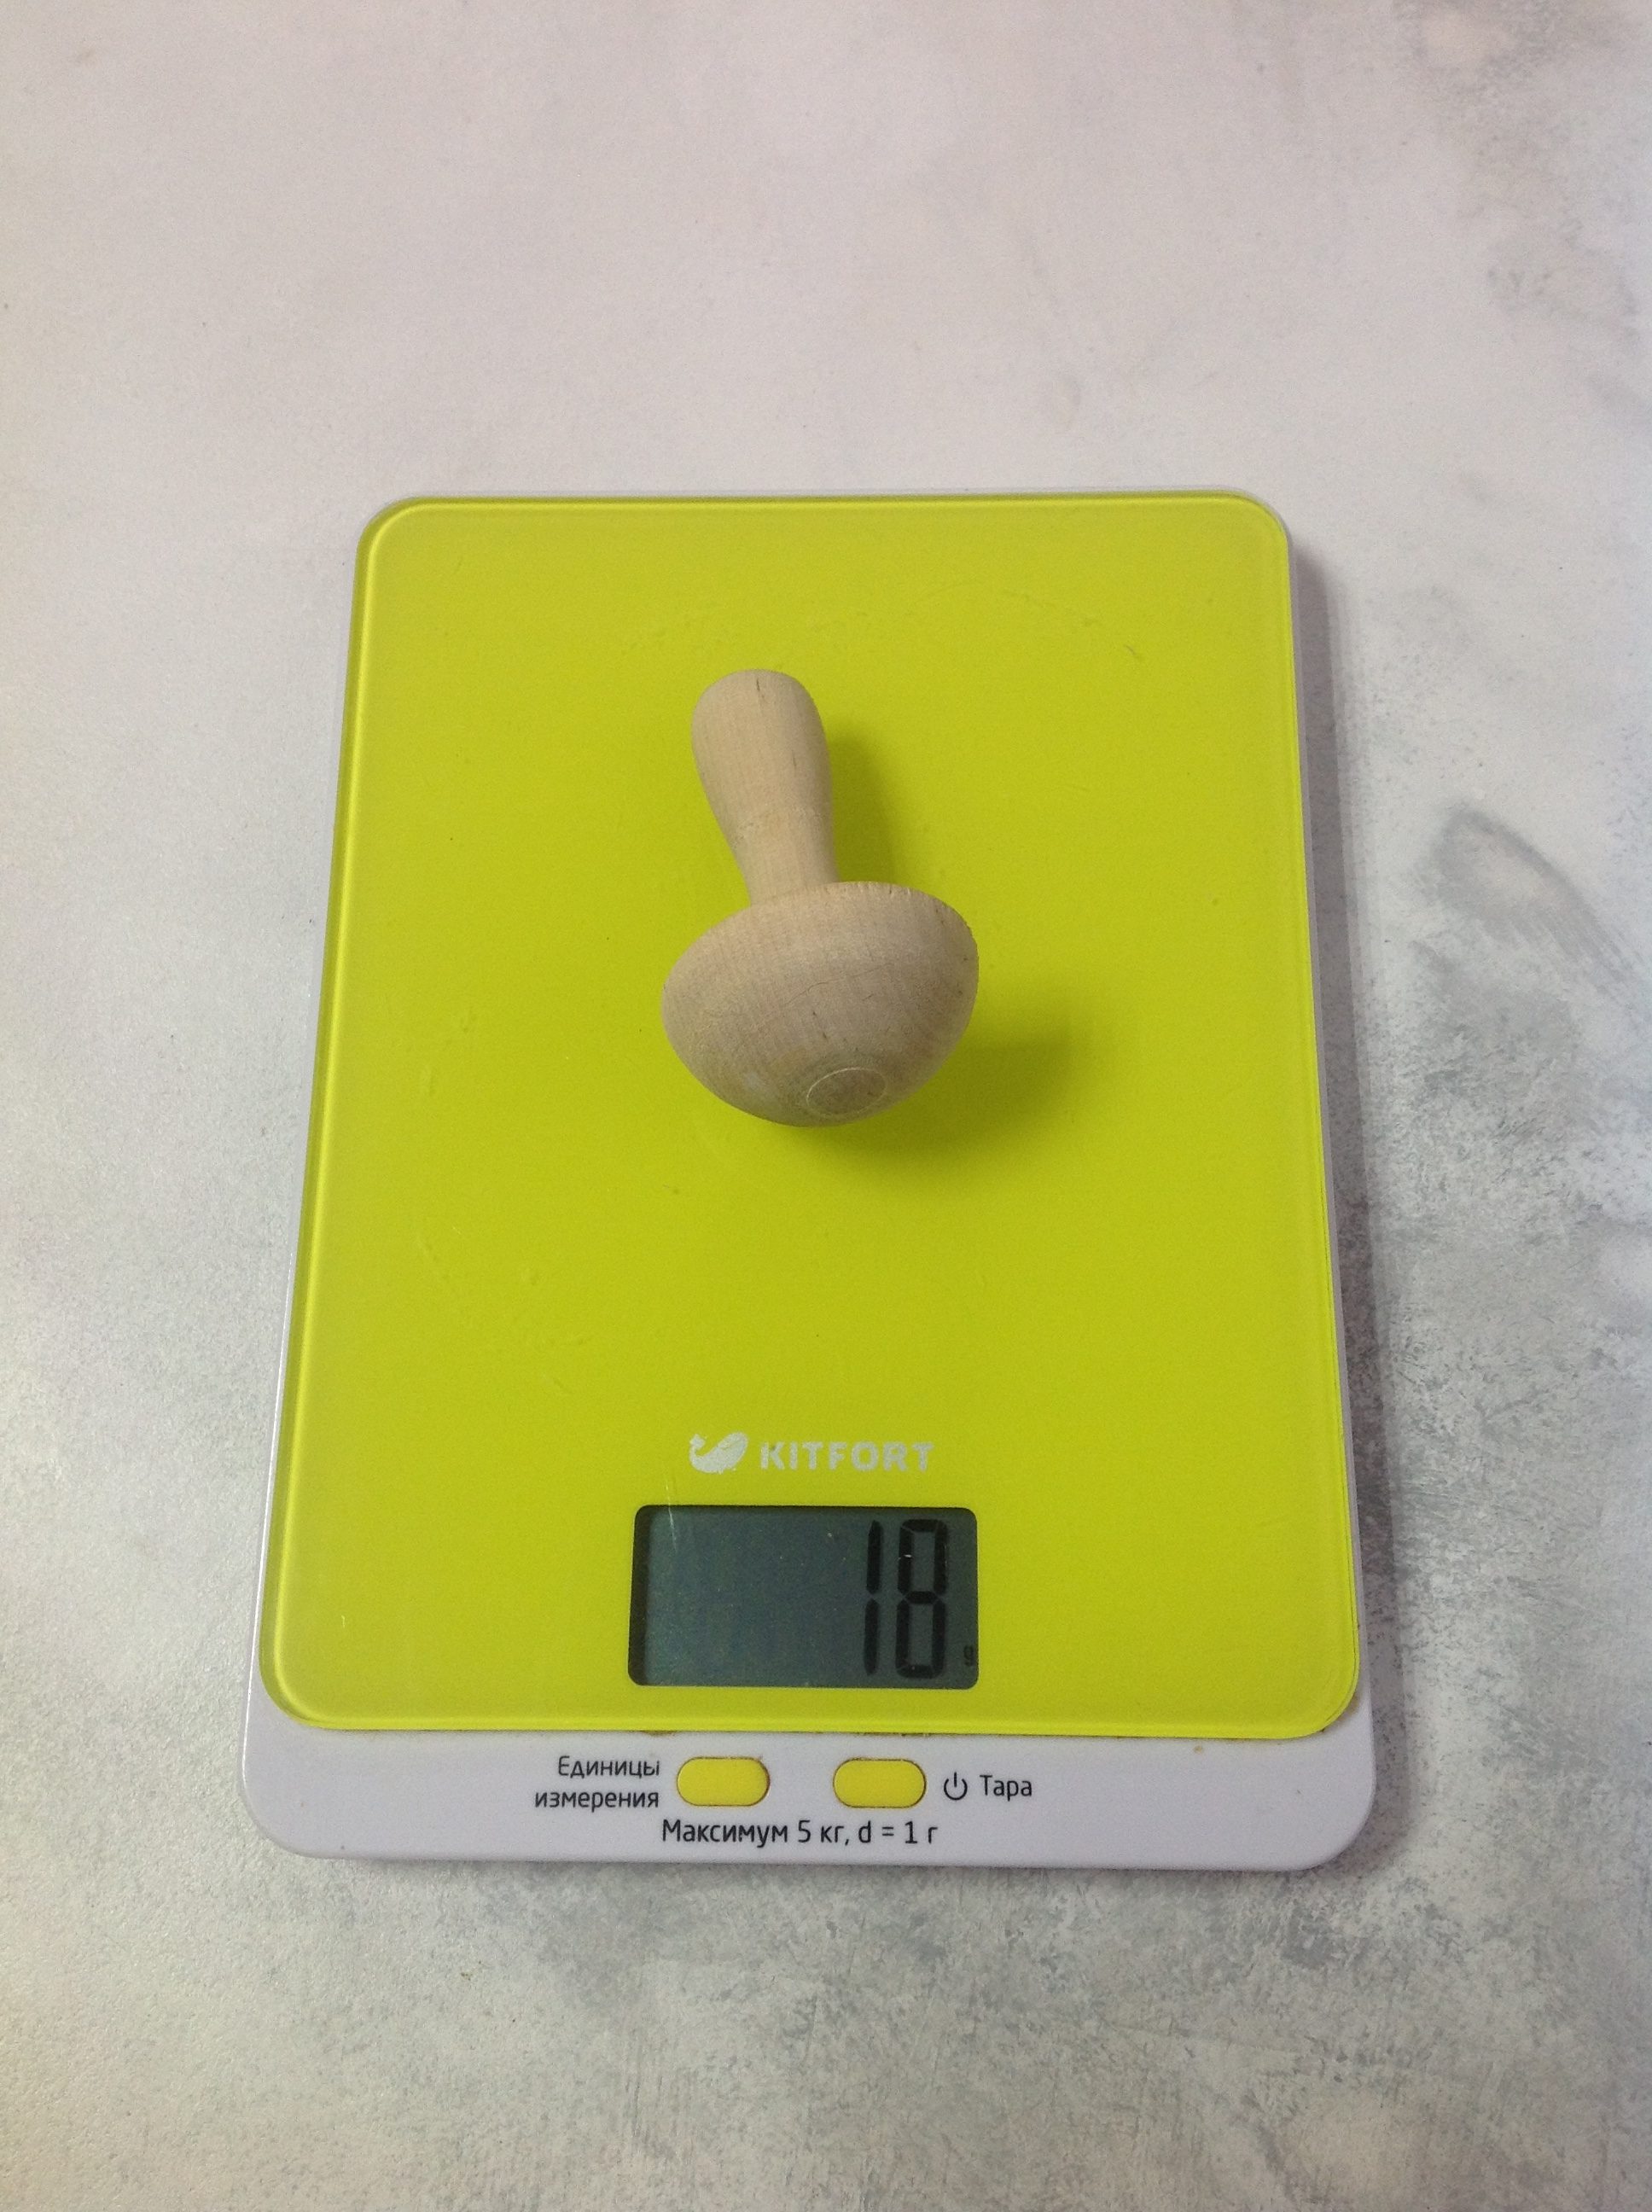 How much does a small wooden mushroom weigh?